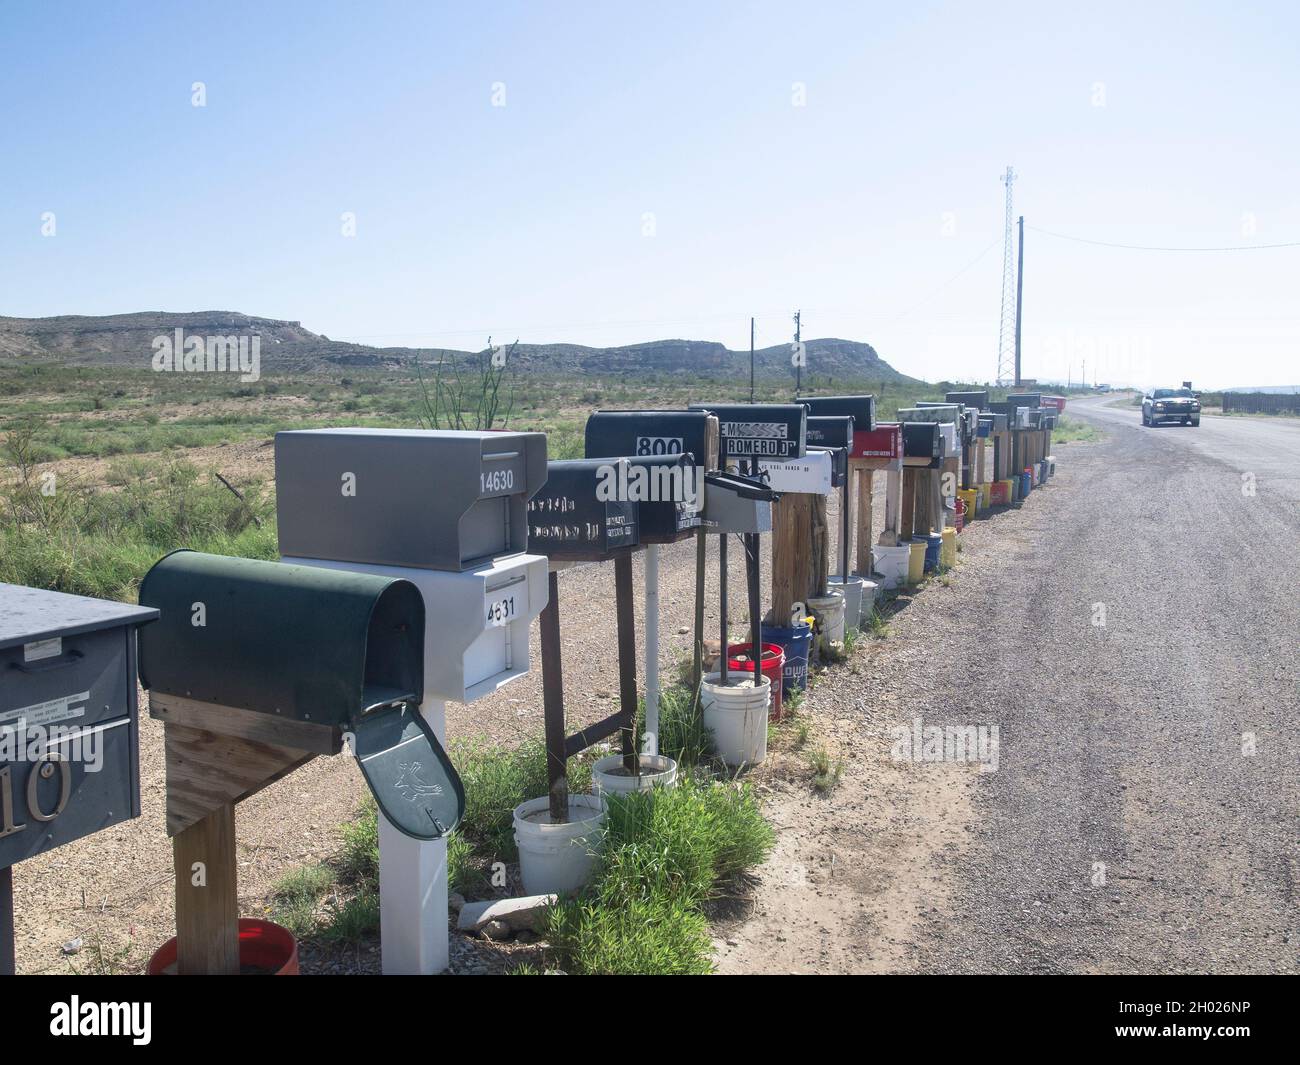 Remote living in West Texas,  50 miles Alpine, Texas, near Big Bend National Park. Postmark still reads Alpine Texas, but homes are separated by many miles and  mail carrier delivers the mail in the middle of nowhere. Stock Photo